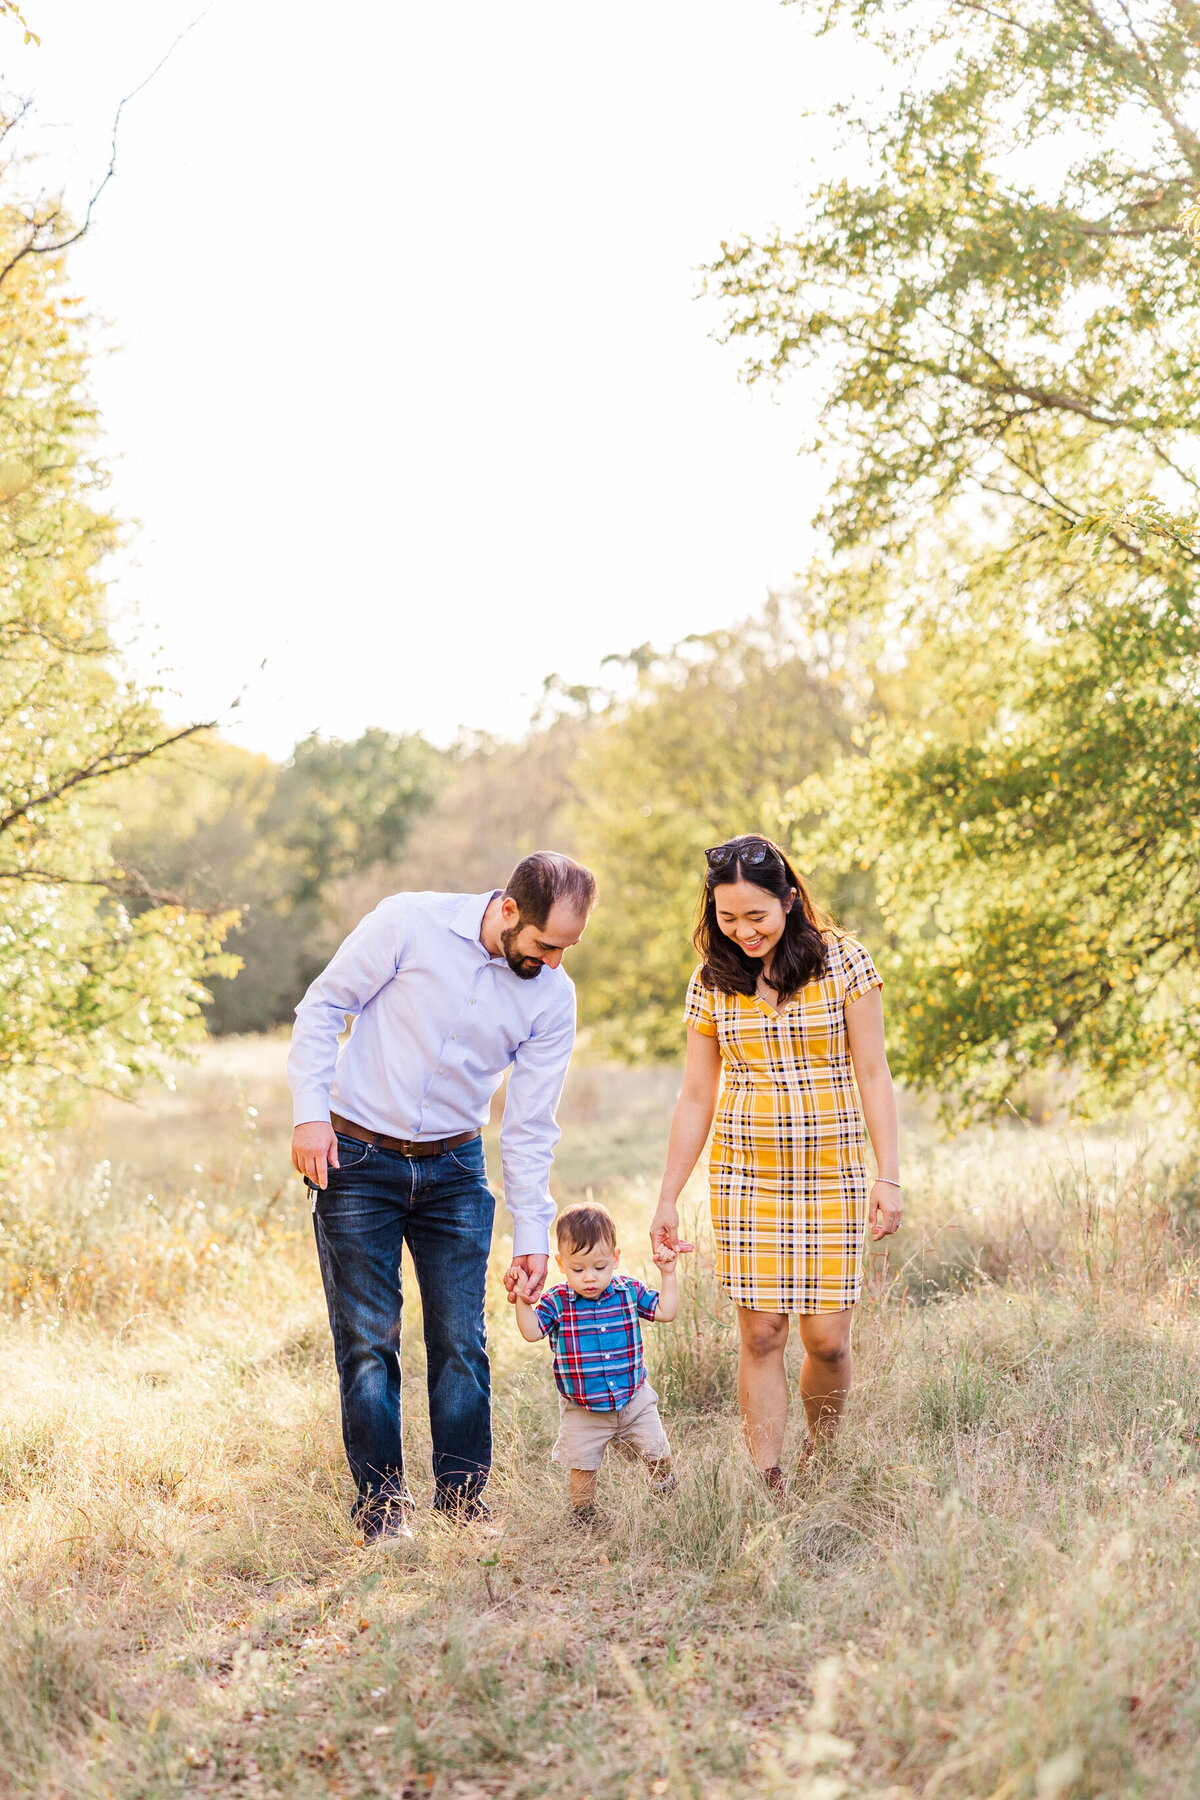 mom-and-dad-holding-1-year-olds-hand-while-waling-through-a-field-of-golden-yellow